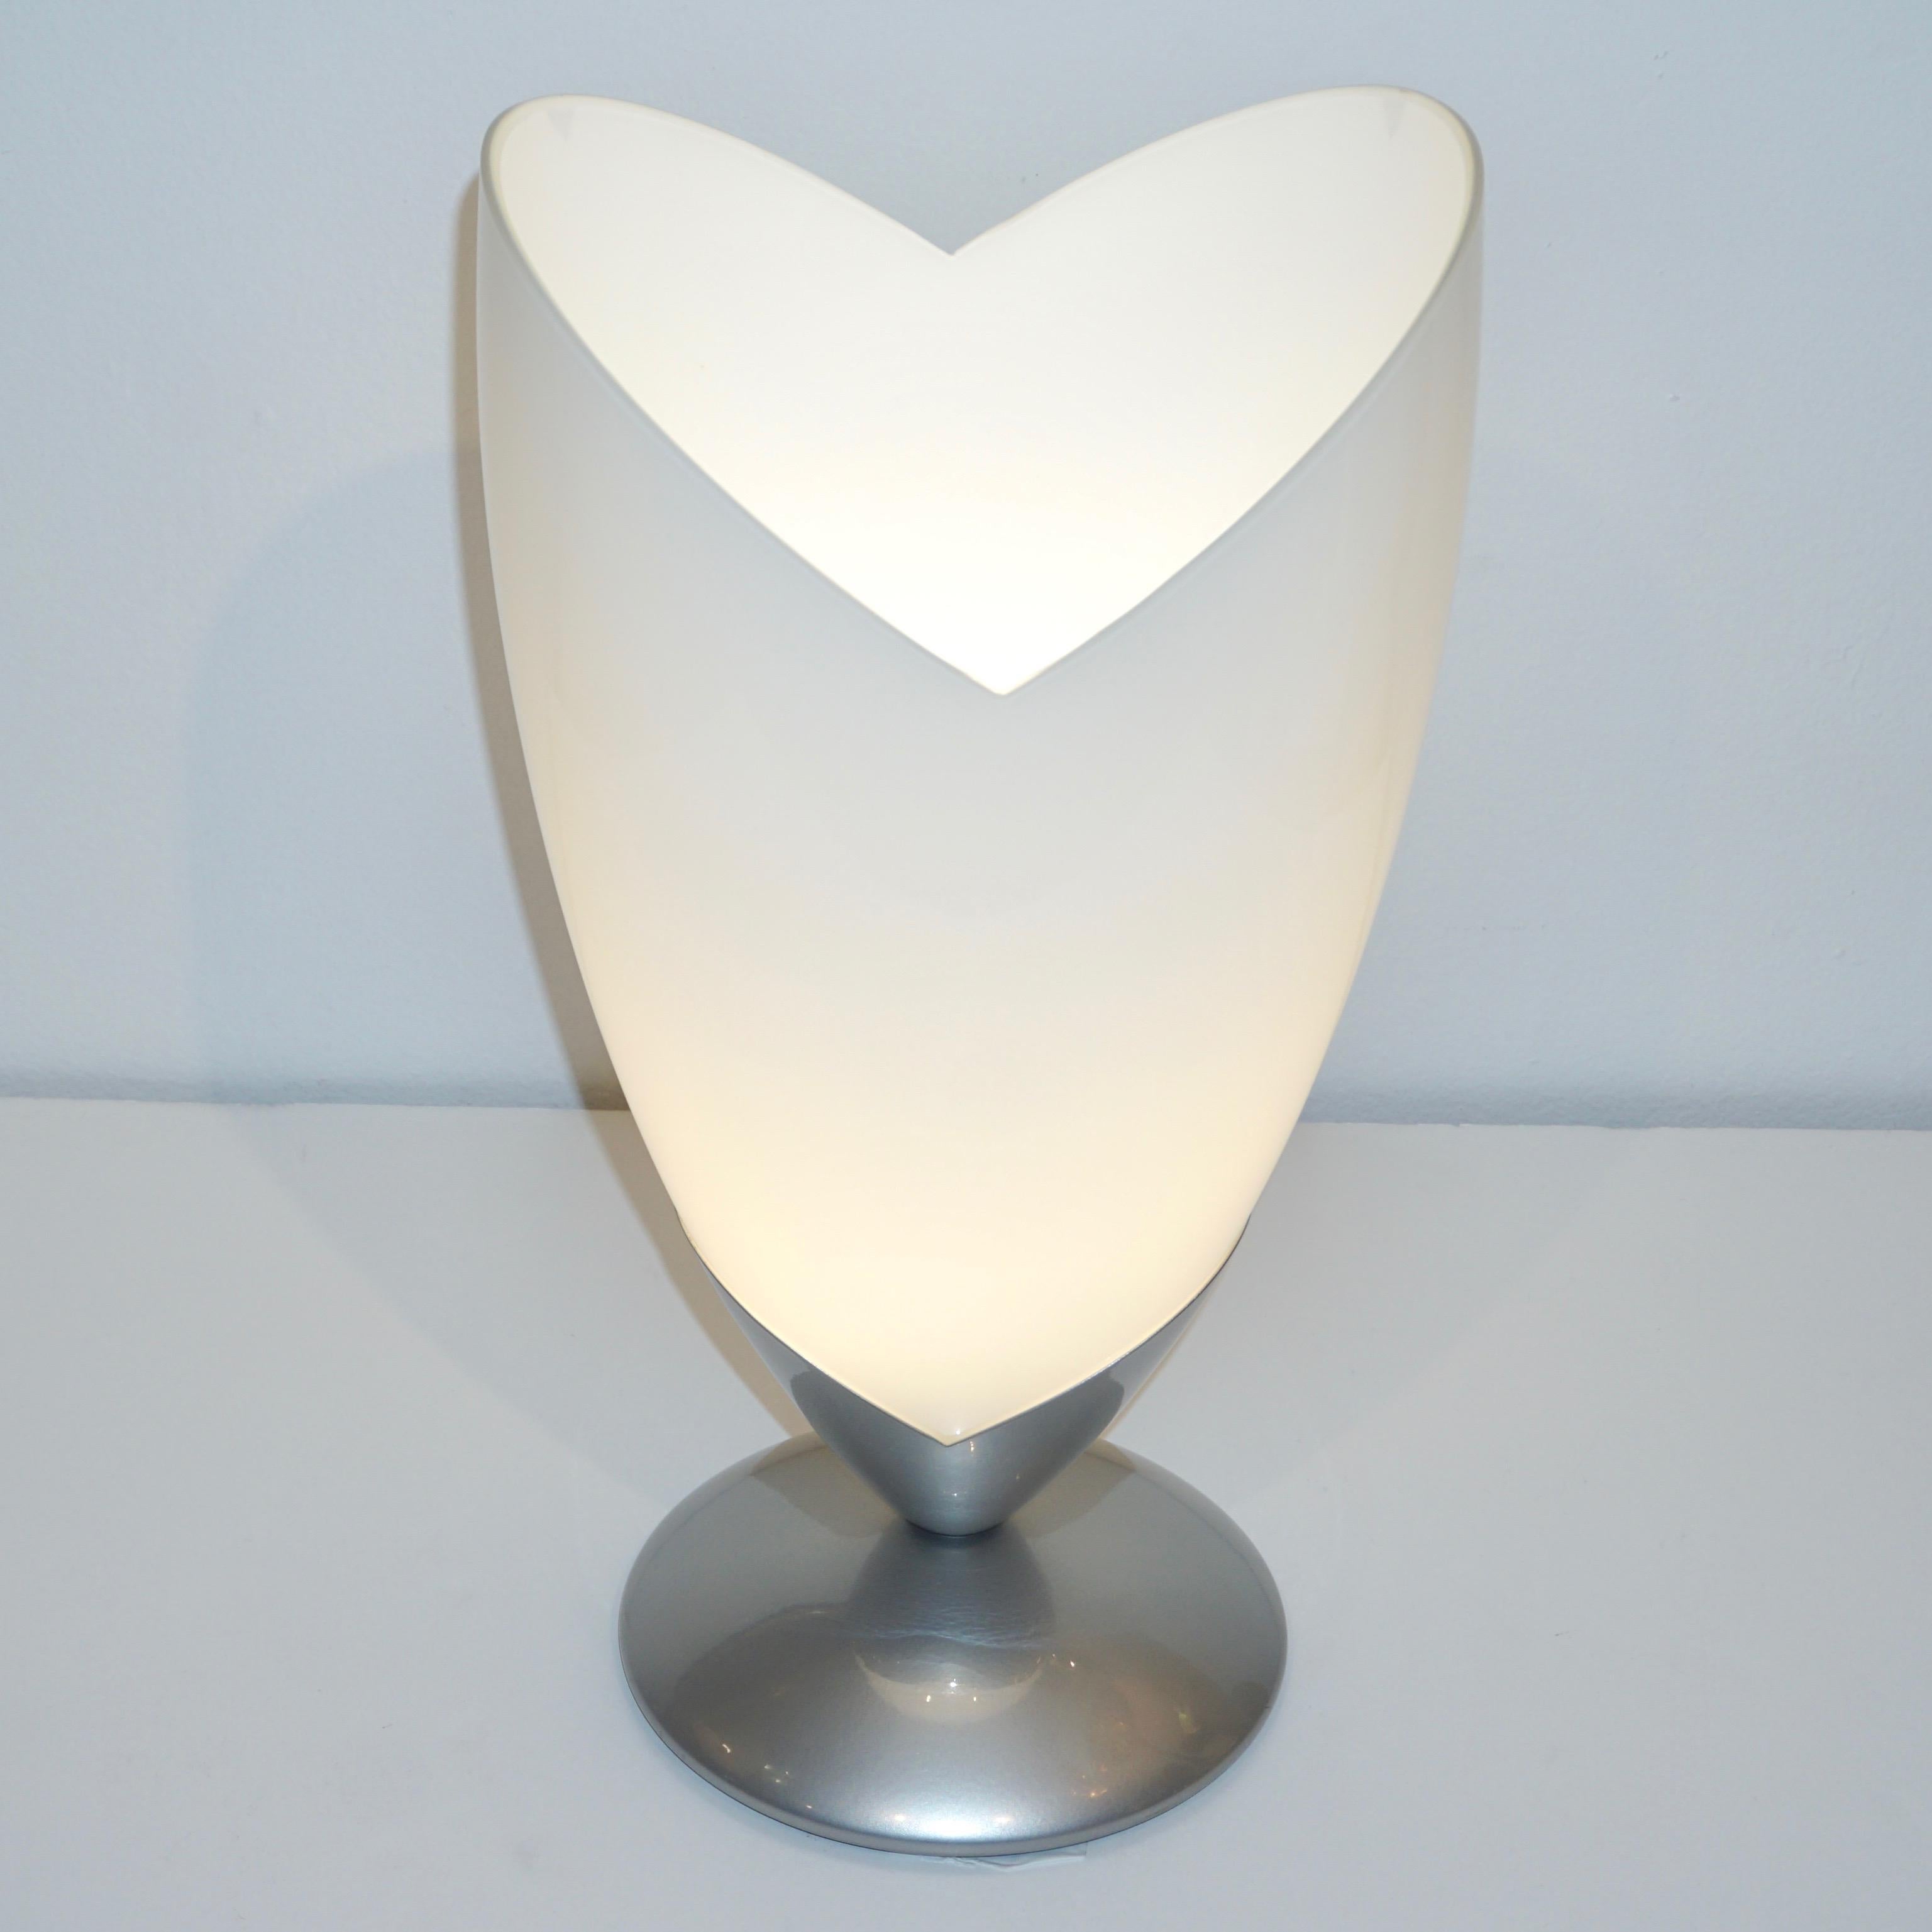 Mid-Century Modern pair of Italian organic lamps by Tronconi - Milano, fine design in Art Deco style with a tulip shape body in high quality overlaid crystal and opaline white glass, supported by a satin nickel round base. In excellent condition,